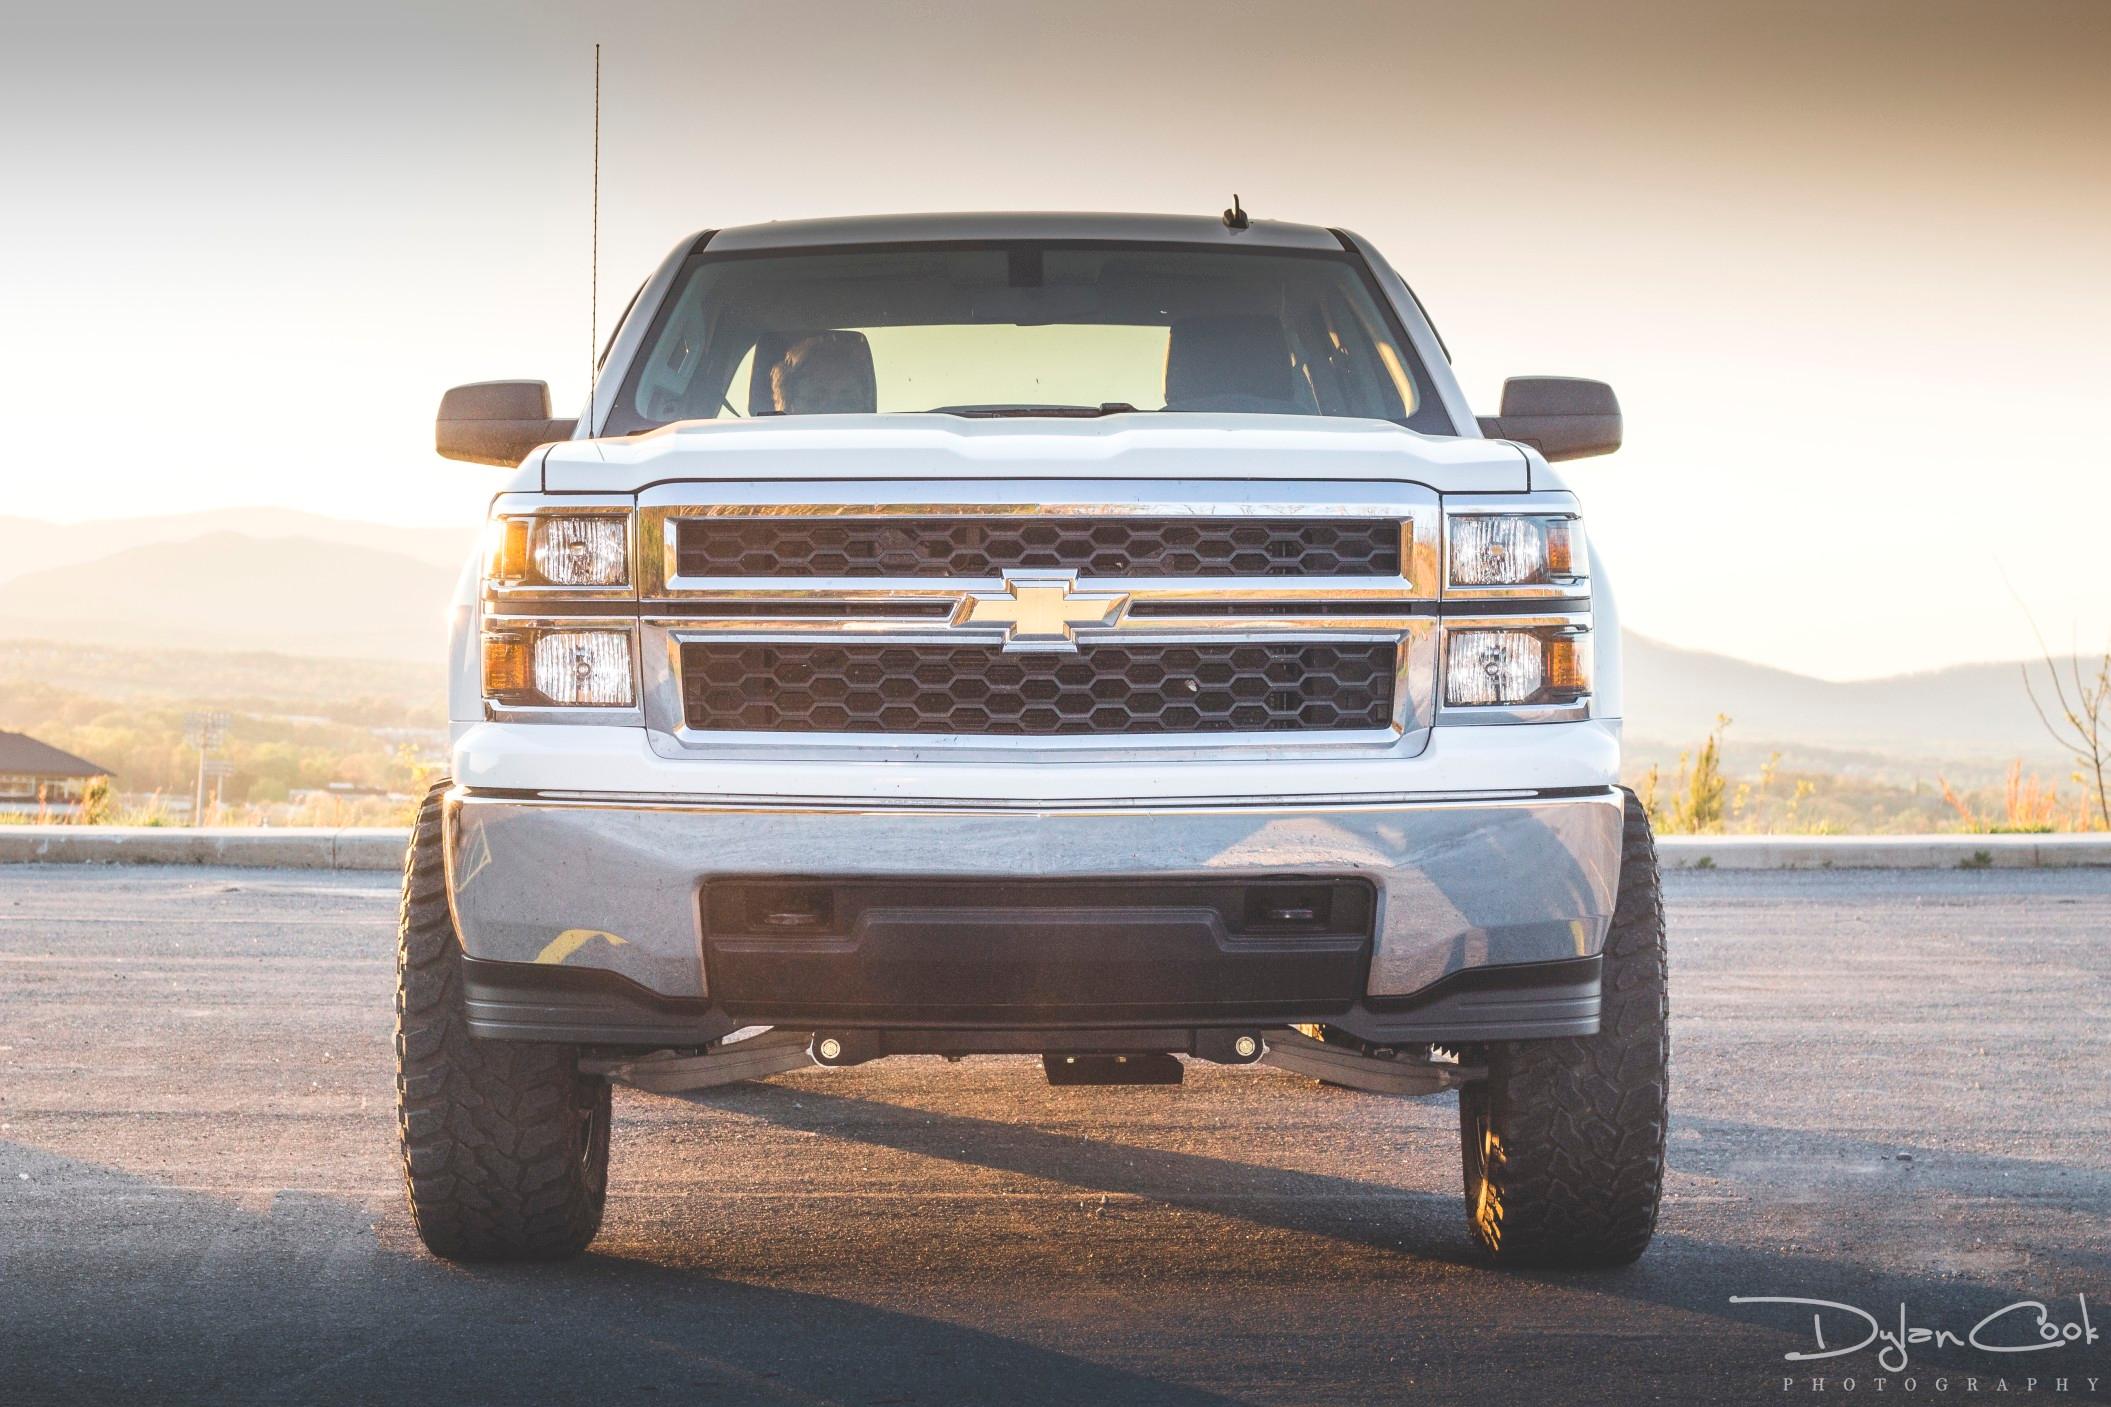 The 2021 Chevy Silverado 1500 diesel gets incredible fuel economy for its size | Twenty20